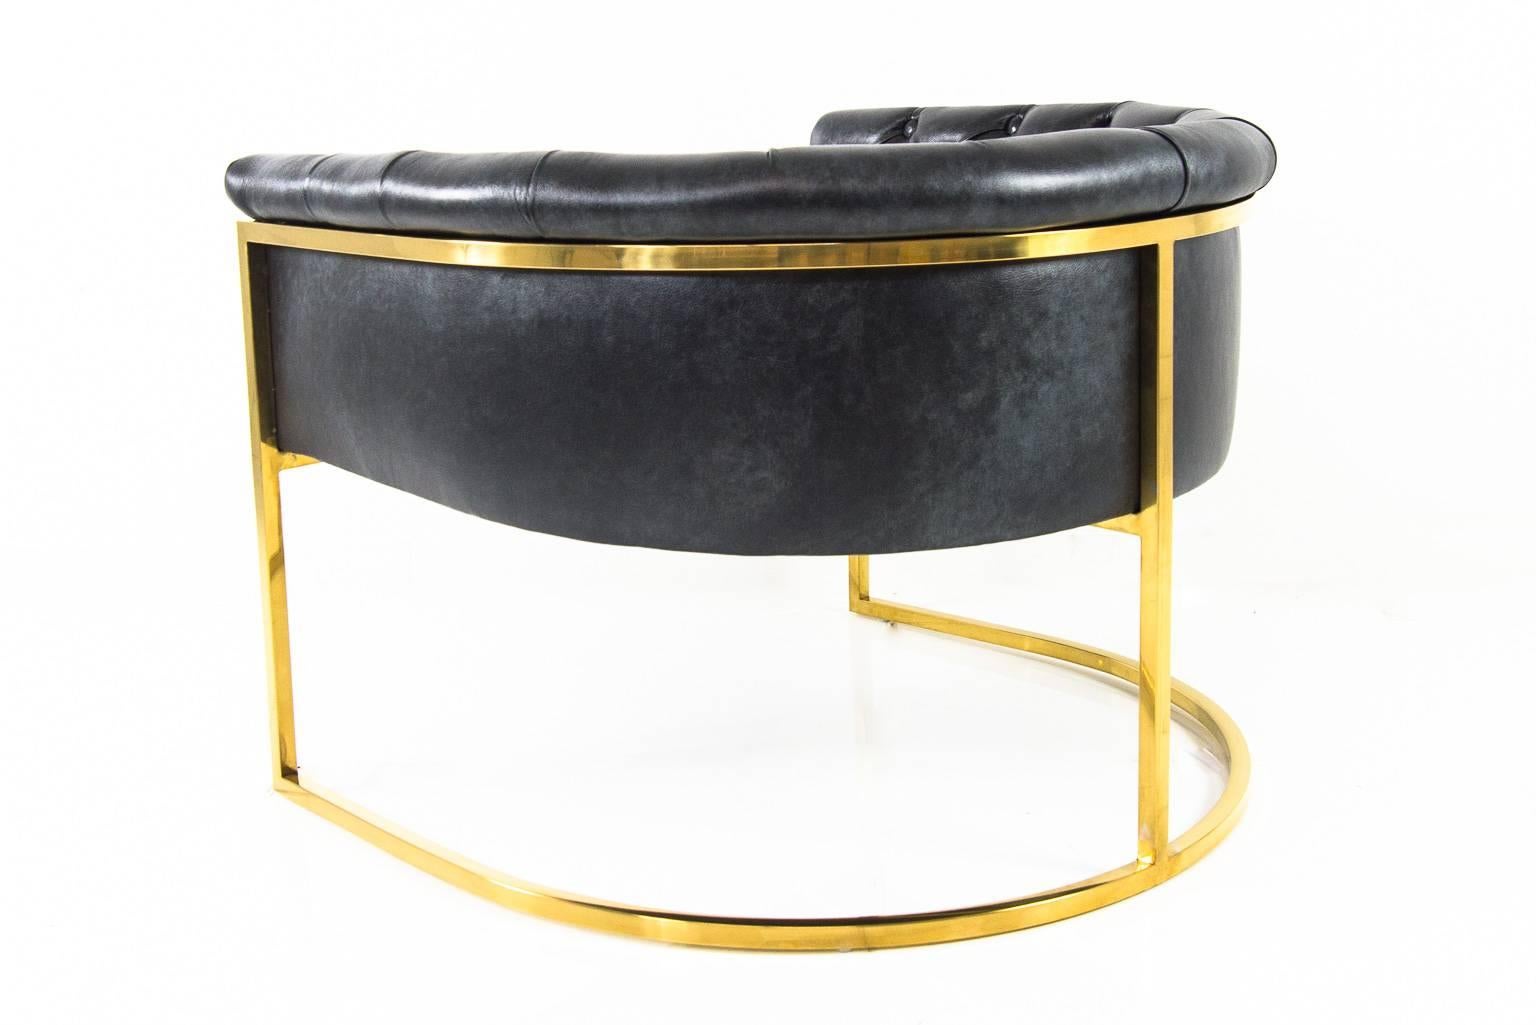 The Lisbon chair is a brass and black leather chair.
The leather is tufted, and sits on top of a brass frame.

This is a made to order piece, for additional chairs please contact us. 

Measures: 33